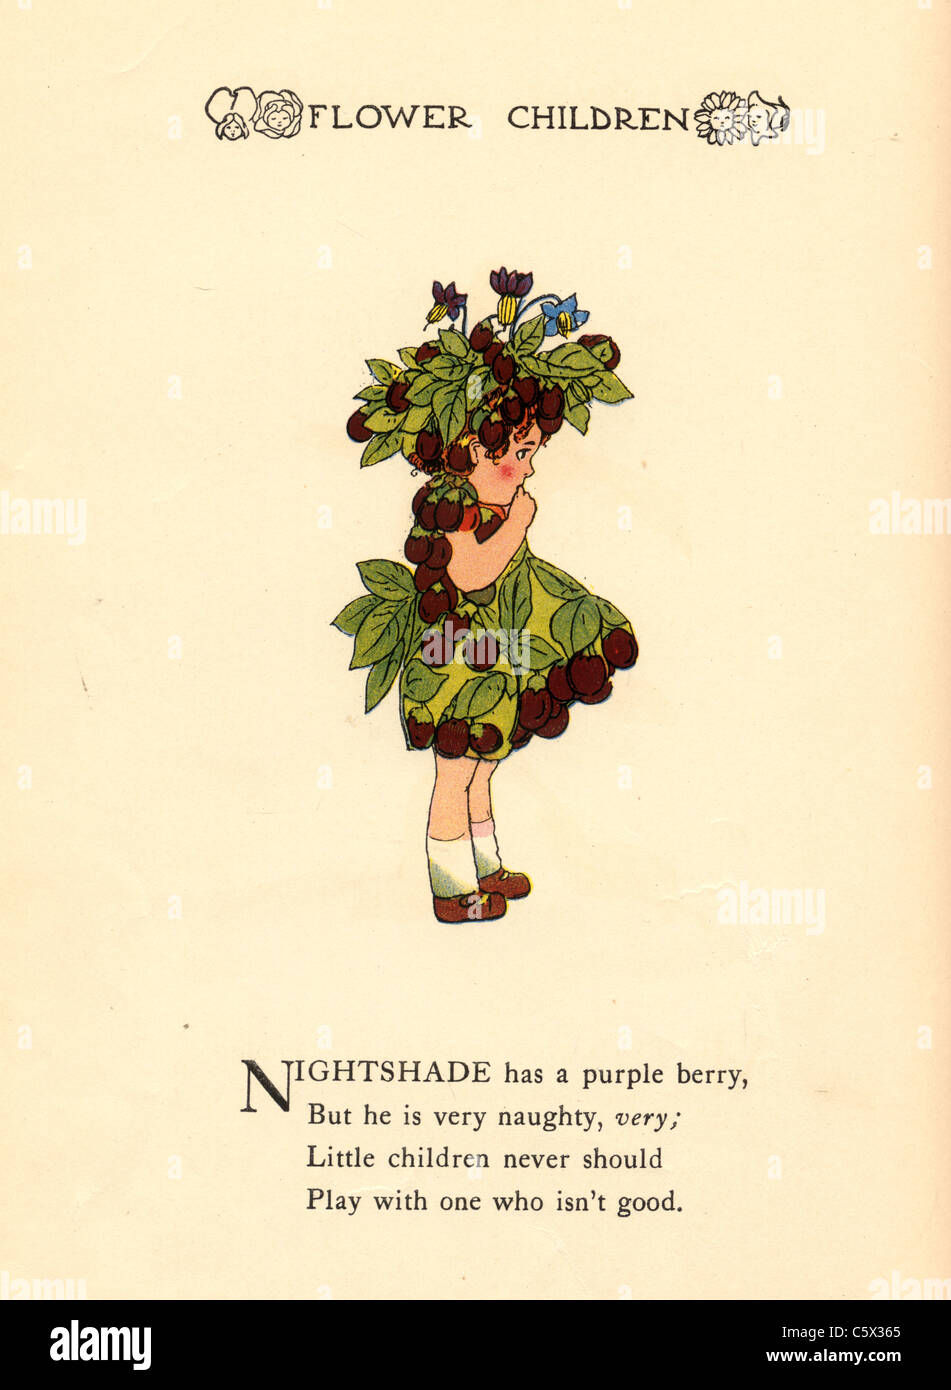 Nightshade - Flower Child Illustration from an antiquarian book Stock Photo